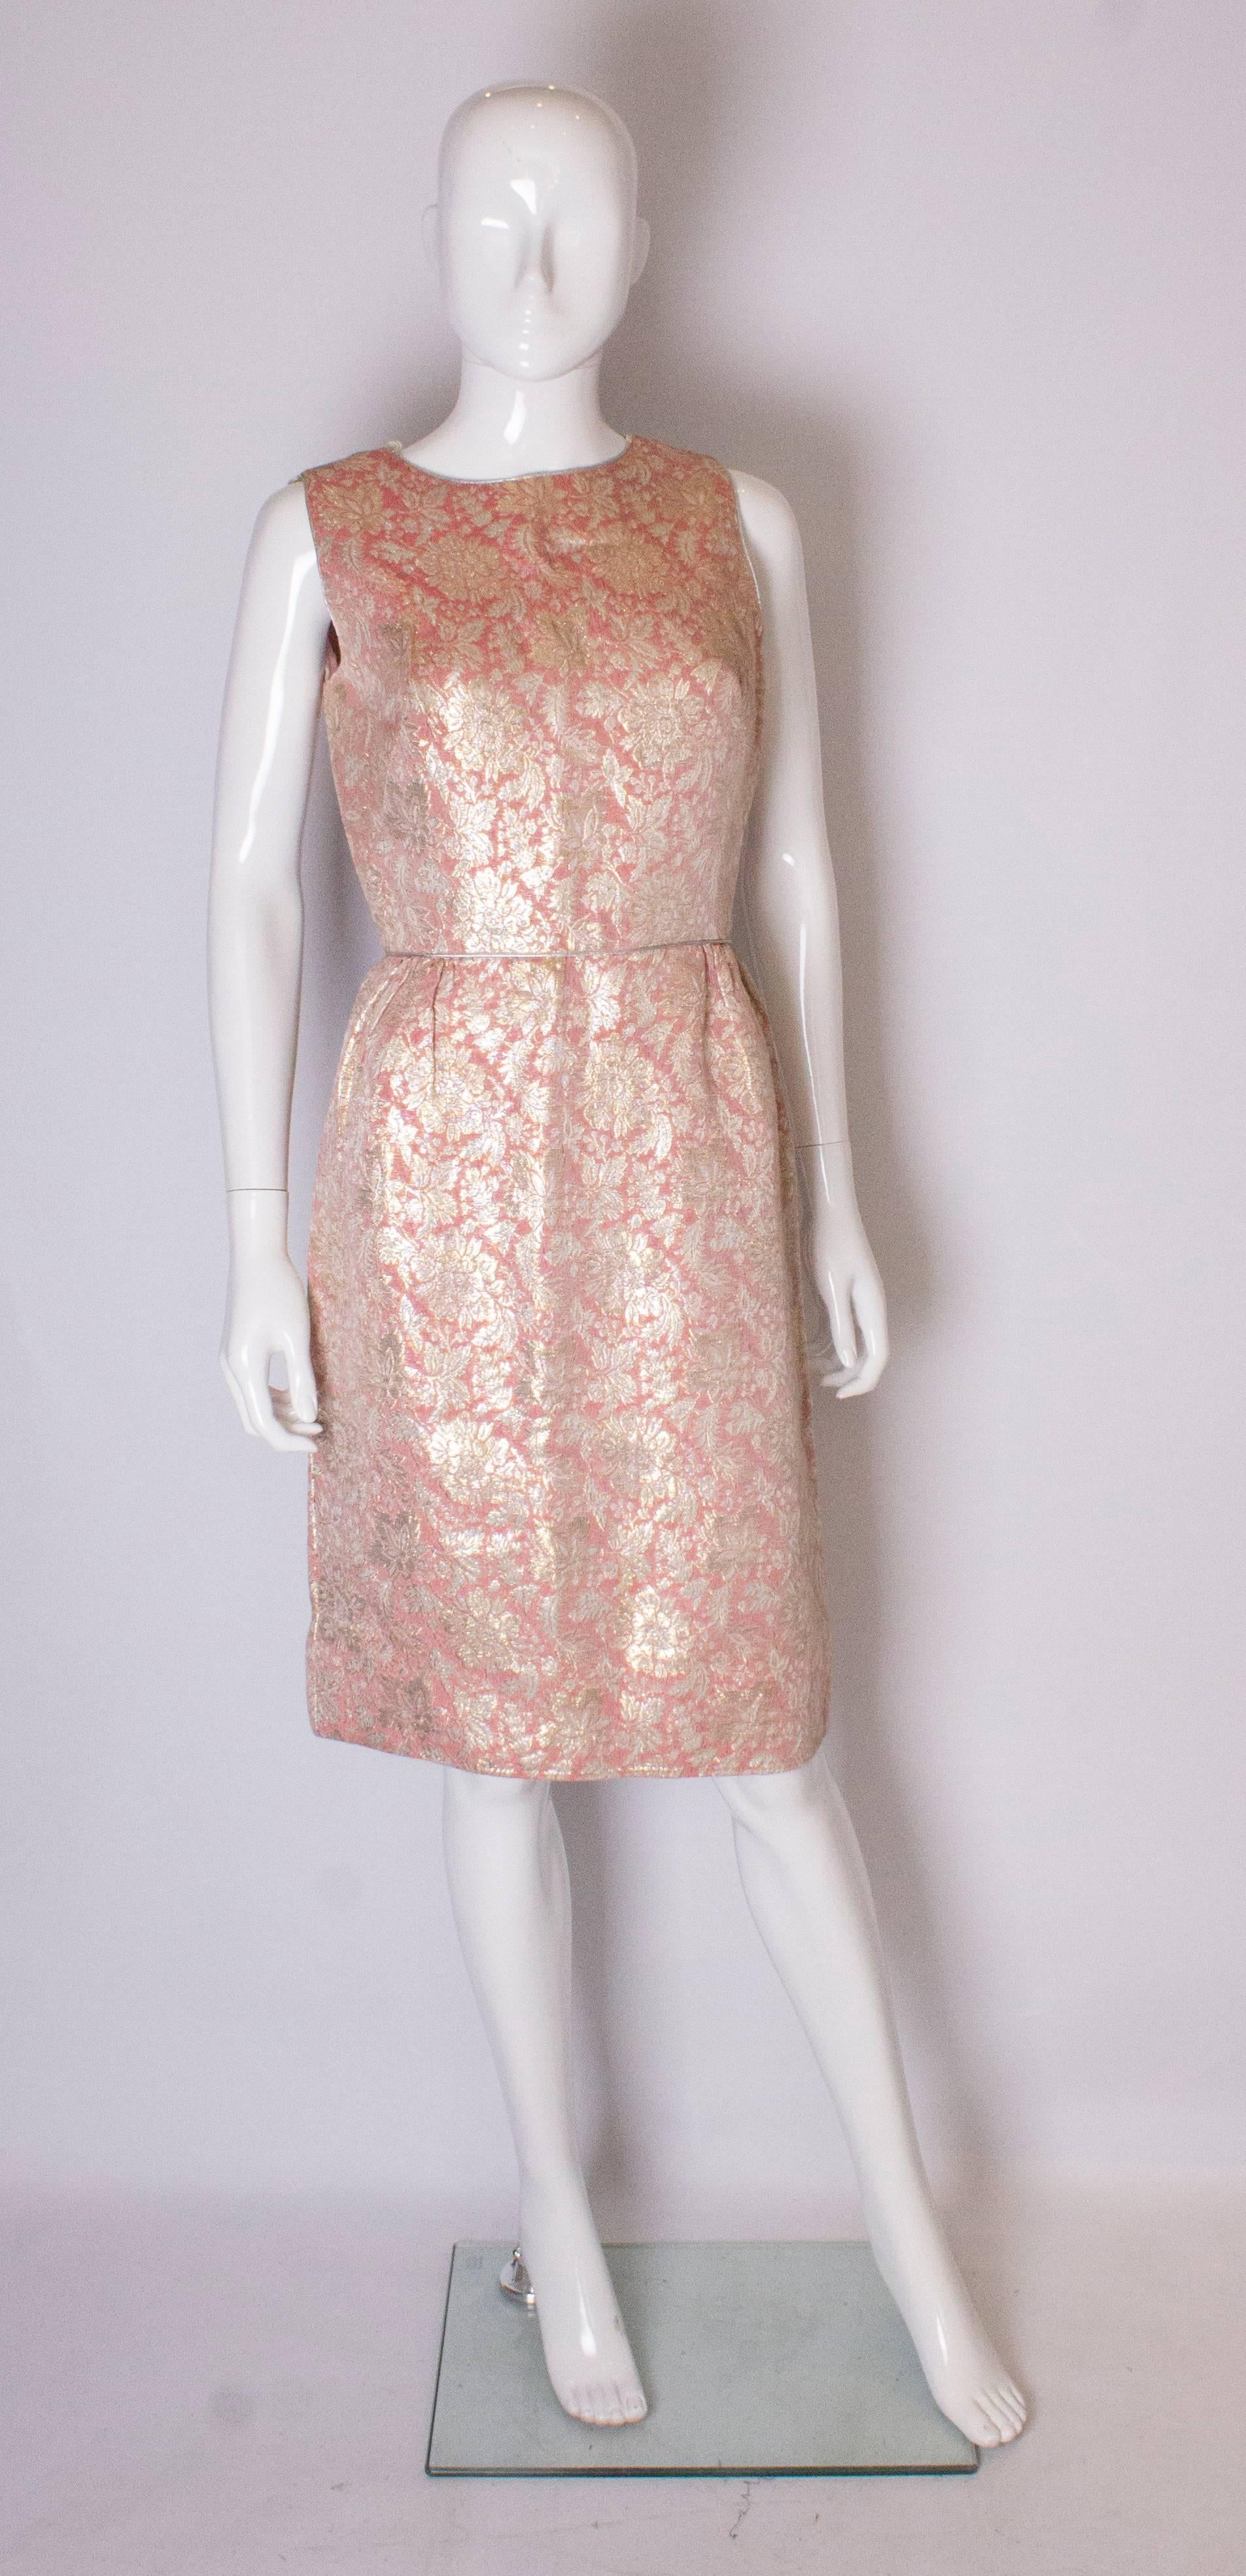 A gold , silver and pink  metallic cocktail dress with silver trim . The dress is gathered at the waist and has a central back zip. It has a three and a half inch hem